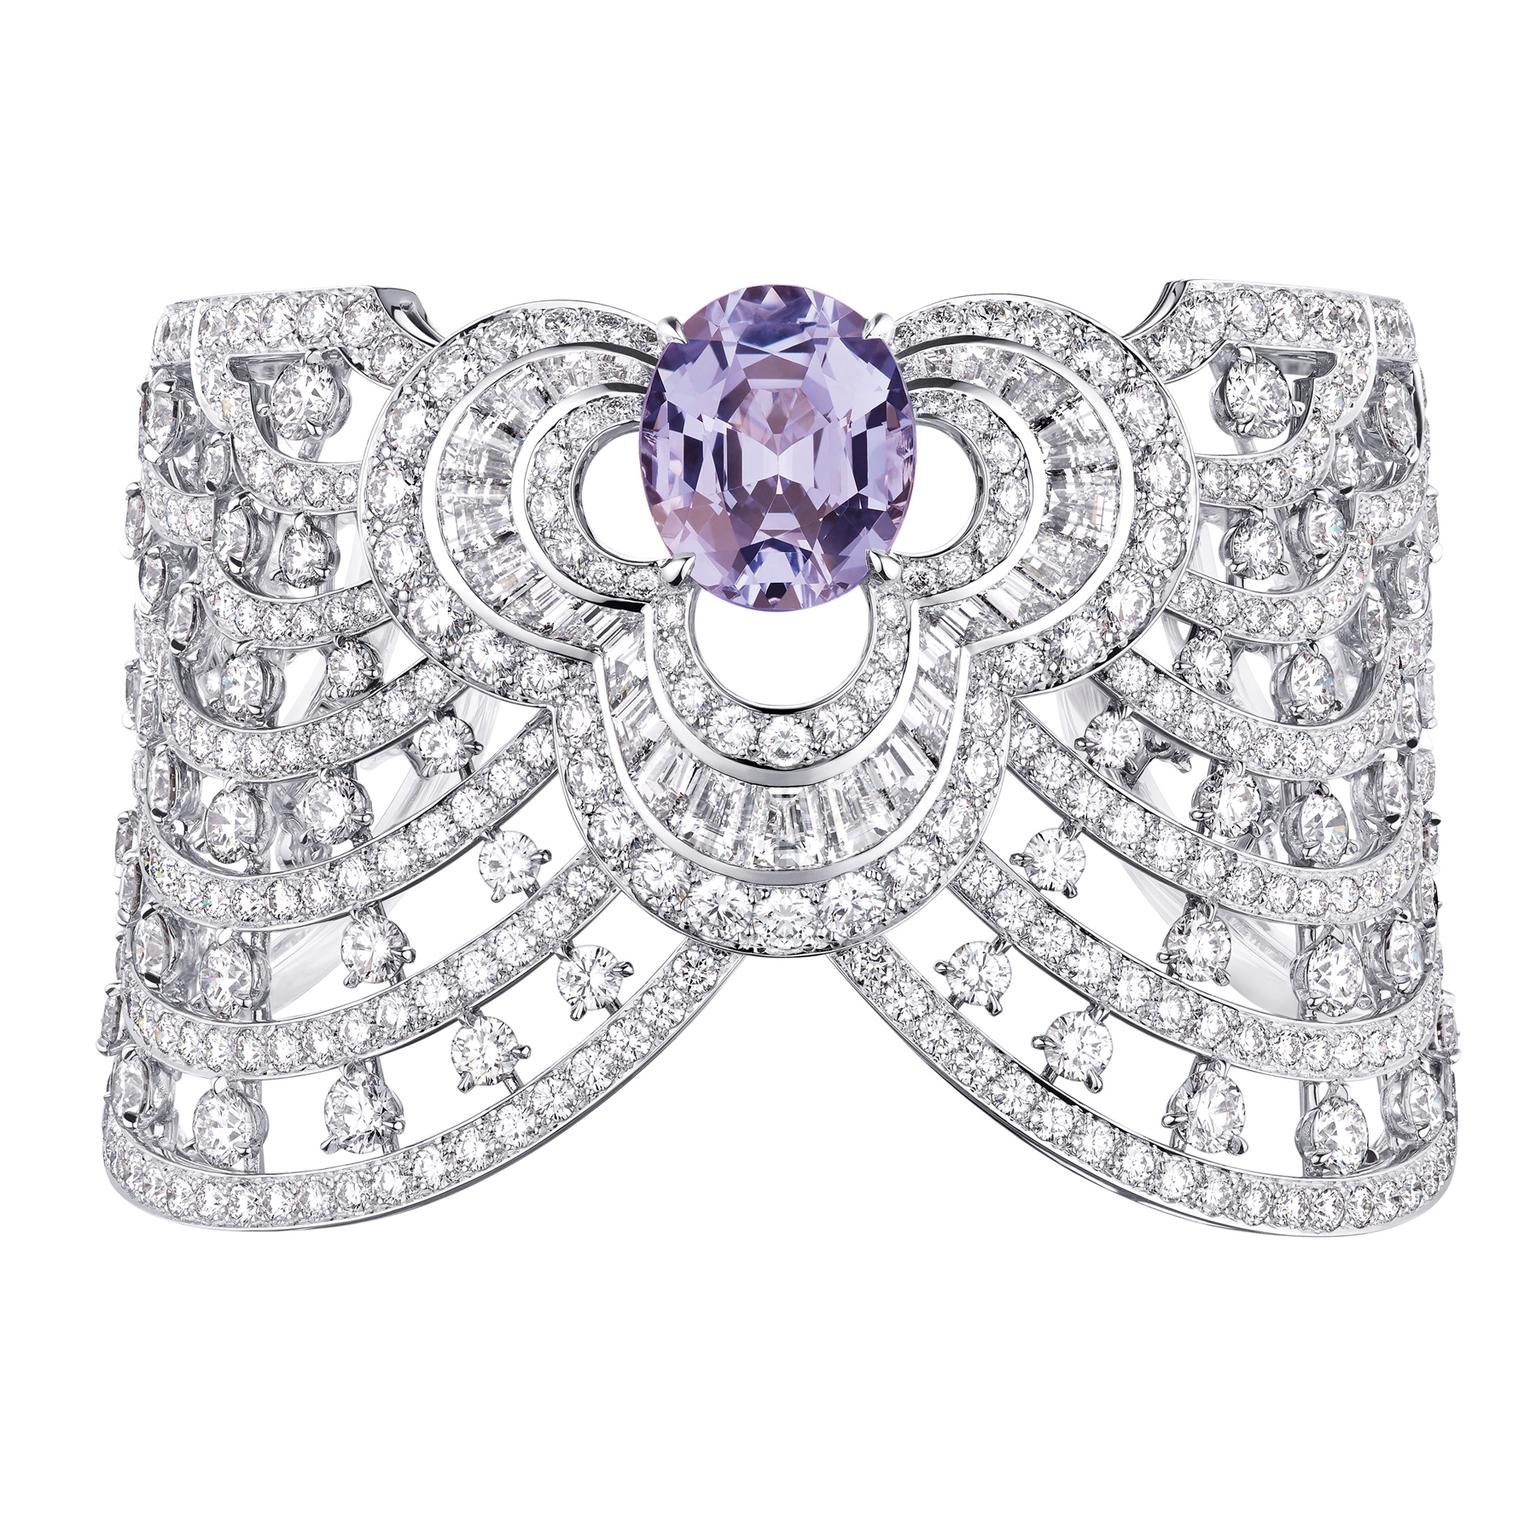 Louis Vuitton Blossom lavender spinel and diamond cuff